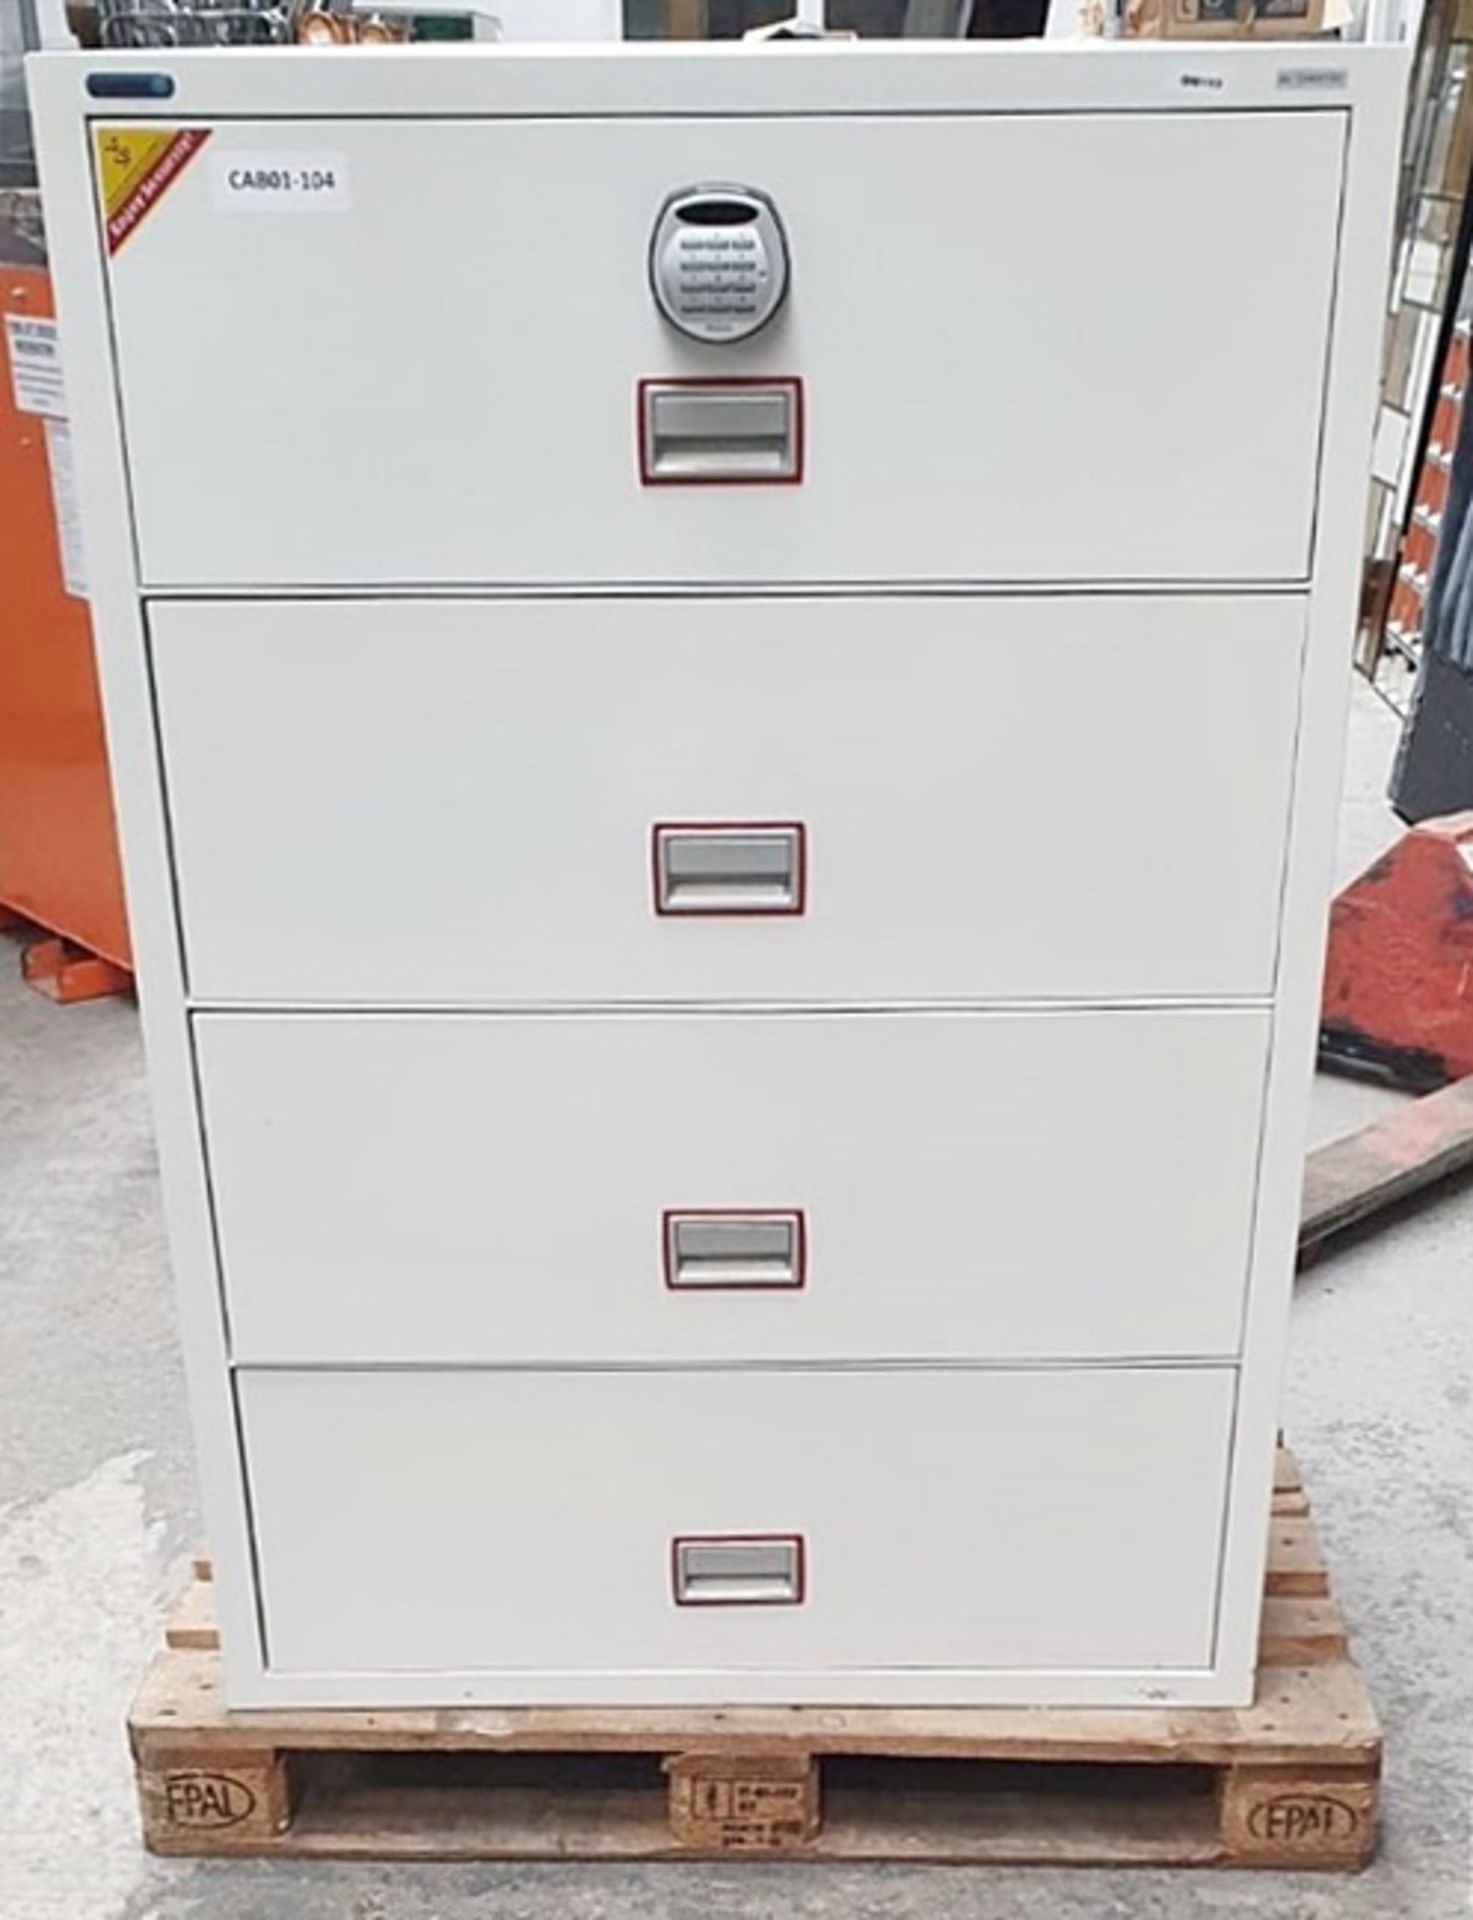 1 x PHOENIX 4-Drawer Fire Safe, With Electronic Lock - Ref: OM113 / G-IT- CL999 - Location: